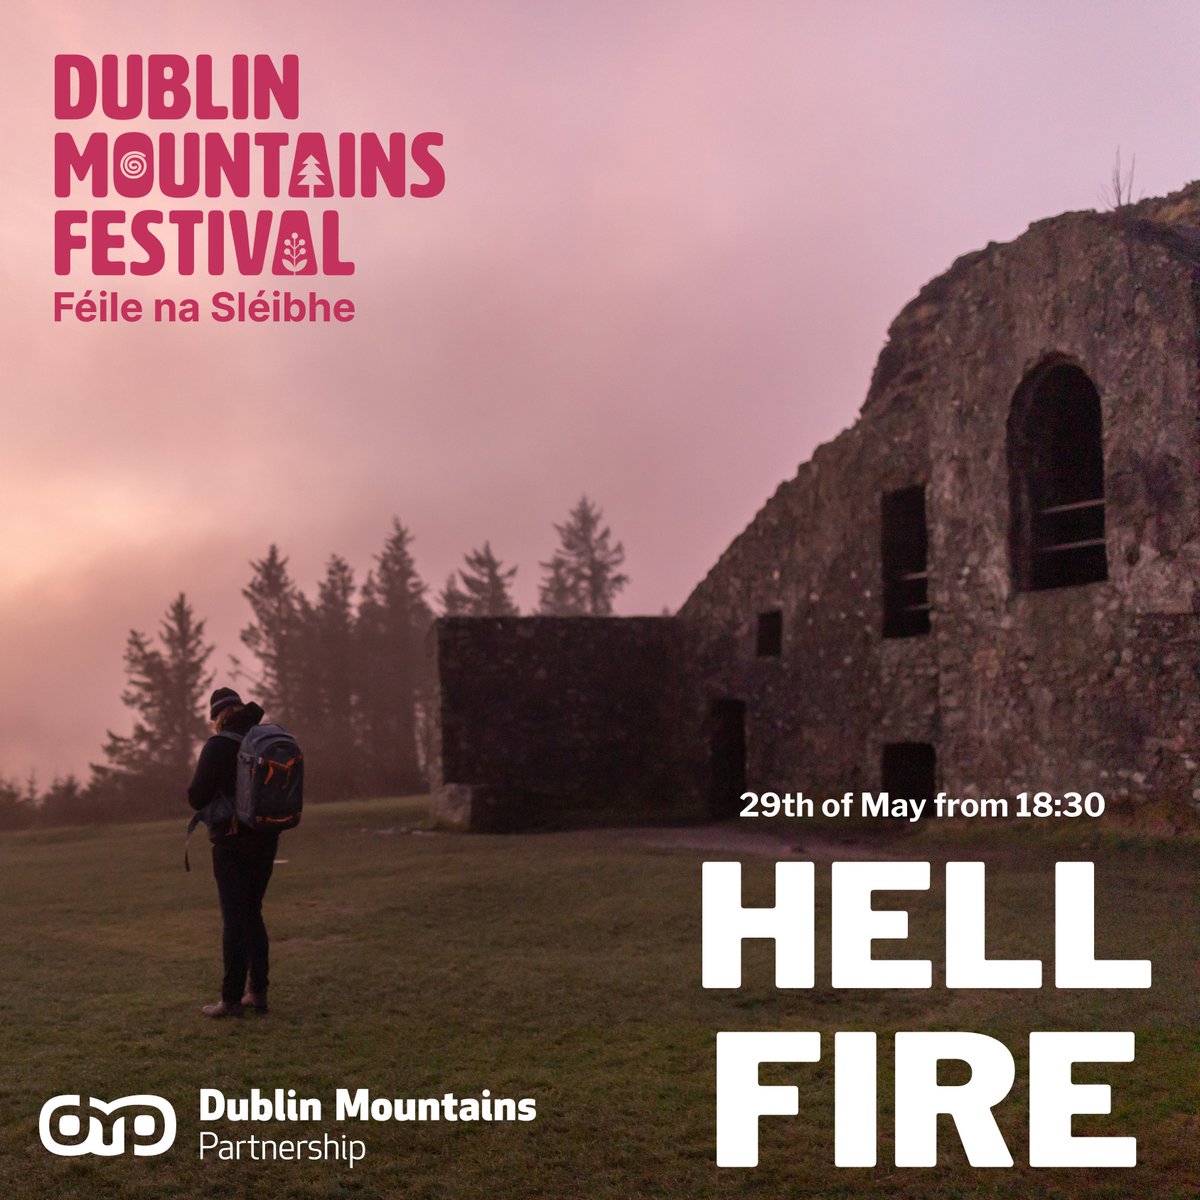 Dublin Mountains Festival: DMP Public Transport Friendly Guided Hike 🥳 Join us for a gently paced hike led by the DMP Volunteer Rangers who will talk about the history of the Hell Fire Club 🔥 📷 by Joe Ladrigan. Full details at dublinmountains.ie #FéileNaSléibhe